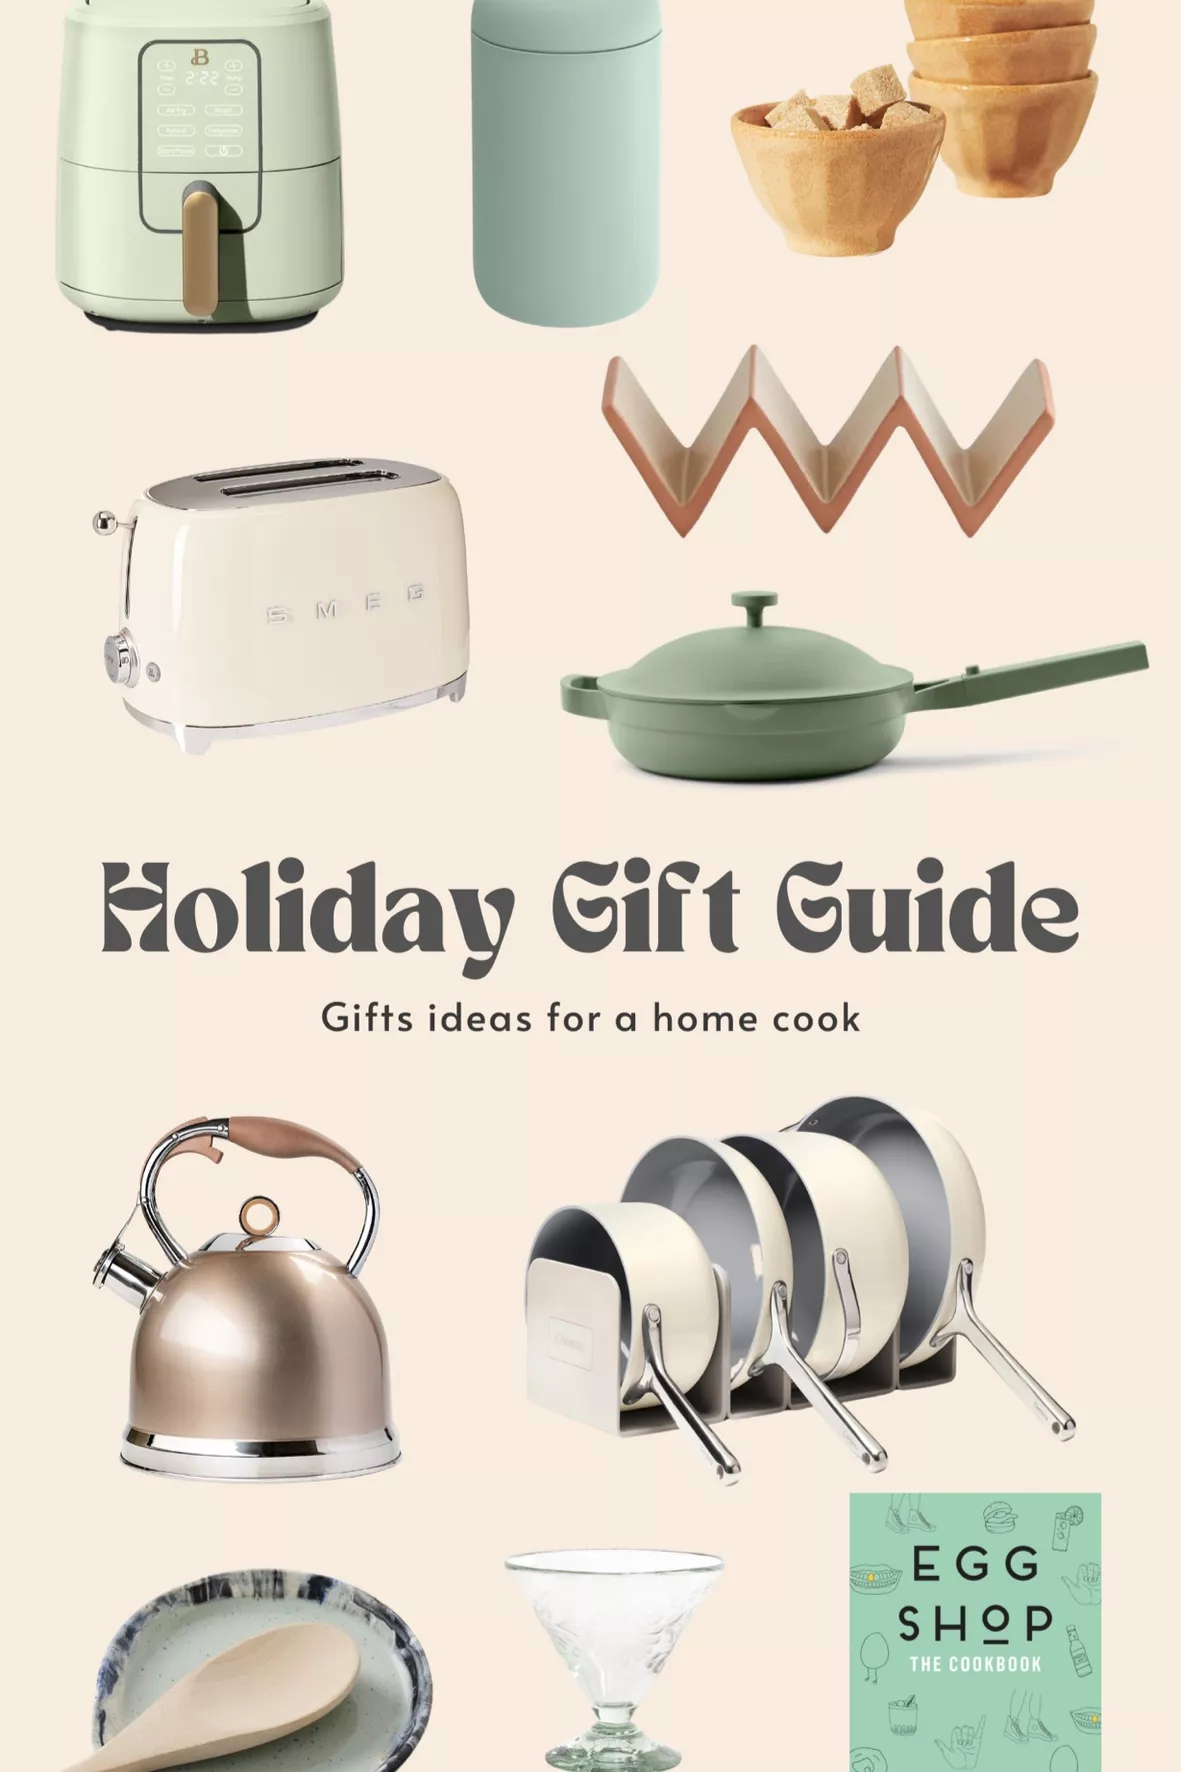 Gift Ideas for Home Cooks